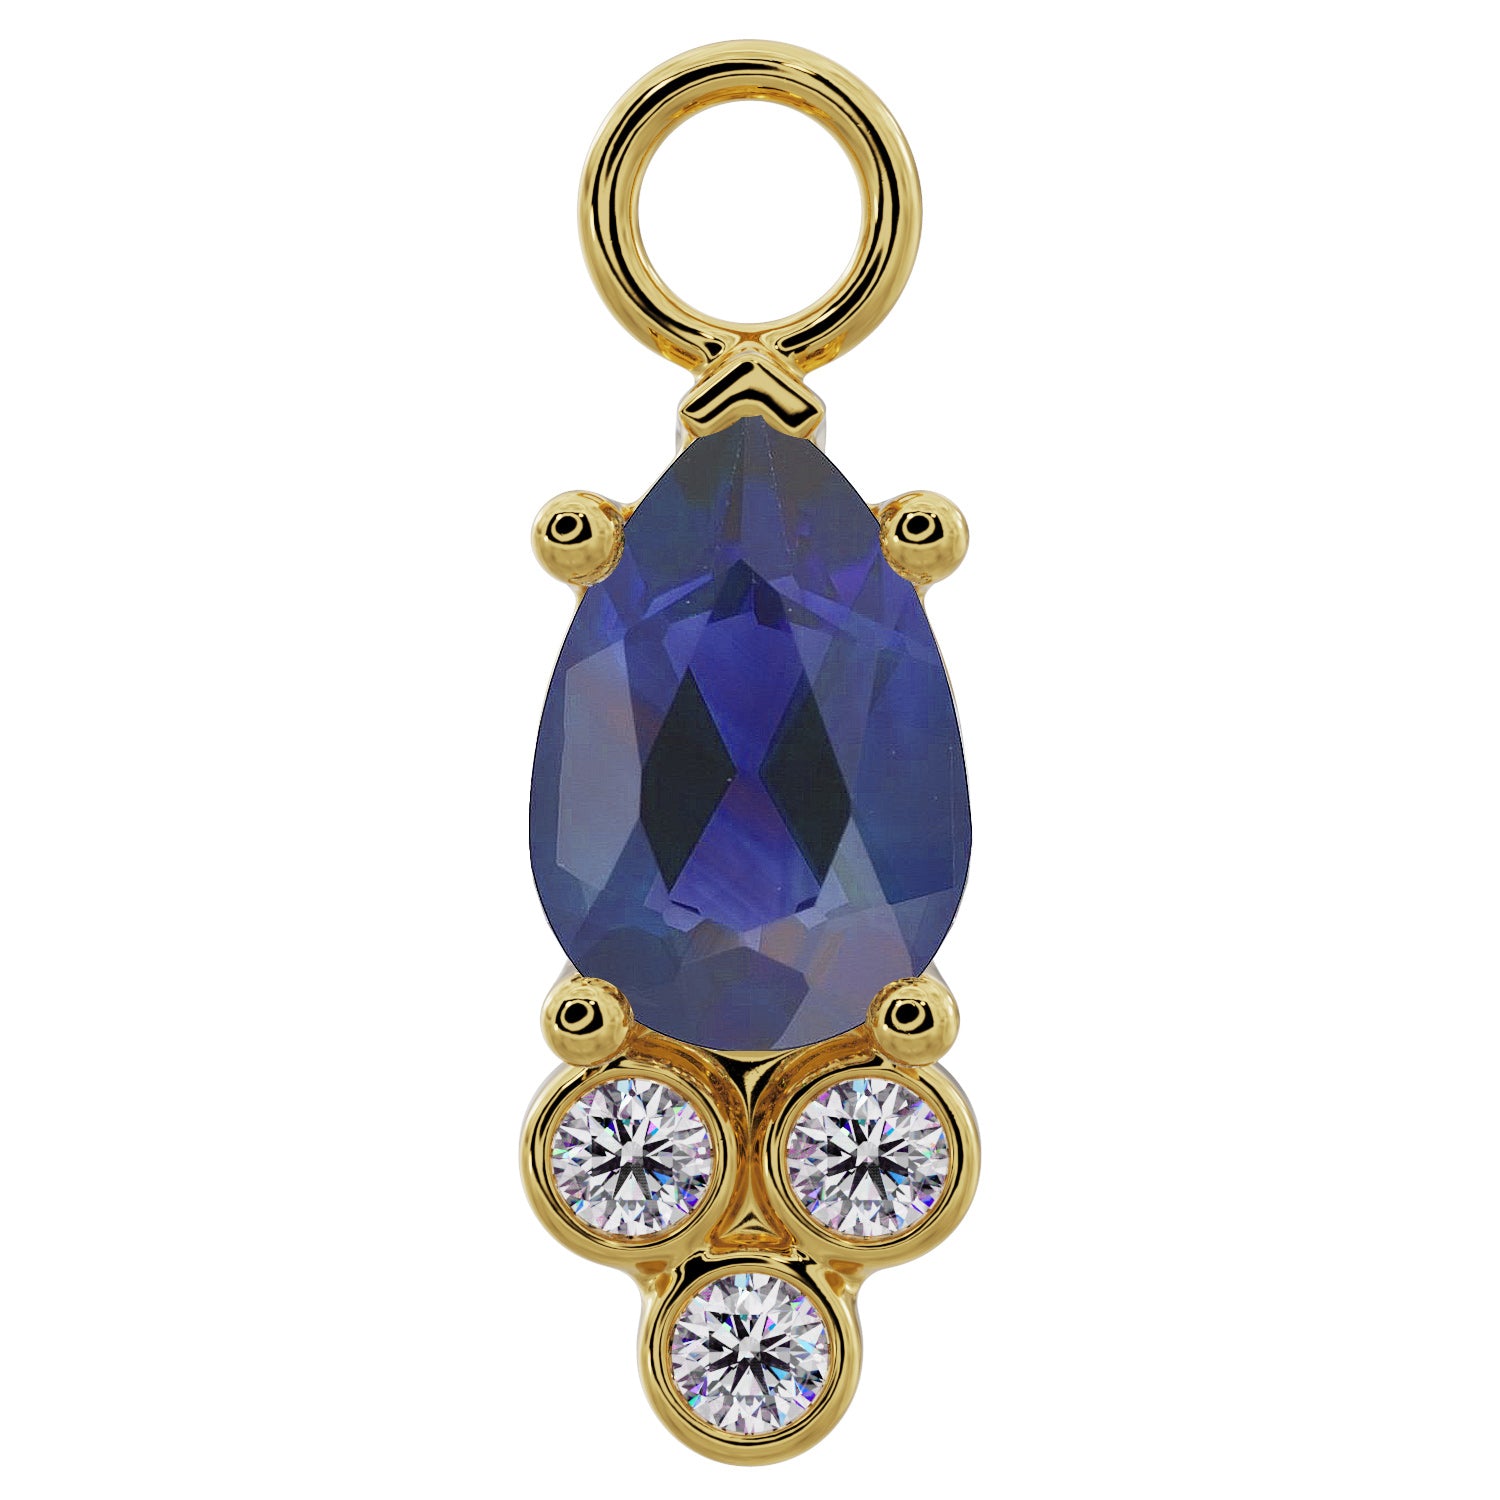 Pear with Tiny Diamonds Charm Accessory for Piercing Jewelry-Blue Sapphire   14K Yellow Gold